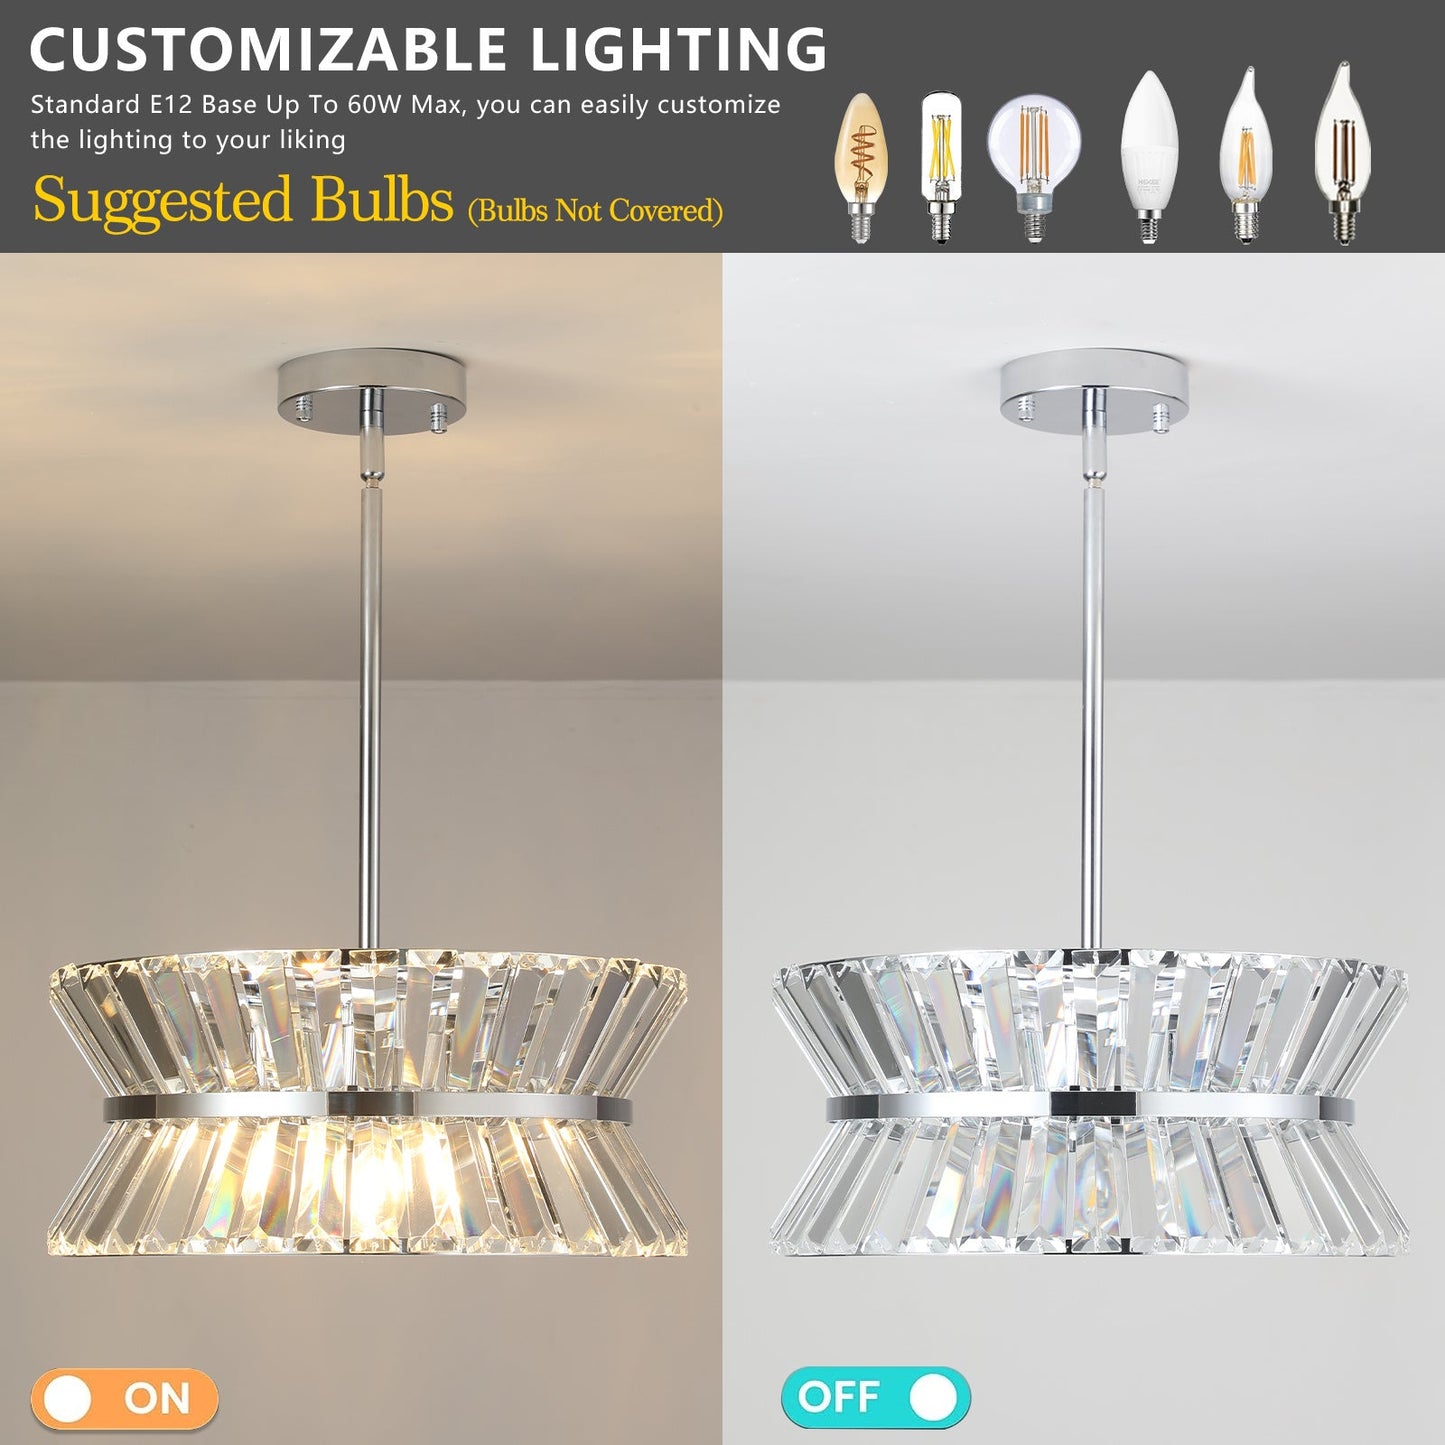 Modern Crystal Chandelier for Living-Room Round Cristal Lamp Luxury Home Decor Light Fixture Home Decor by Design